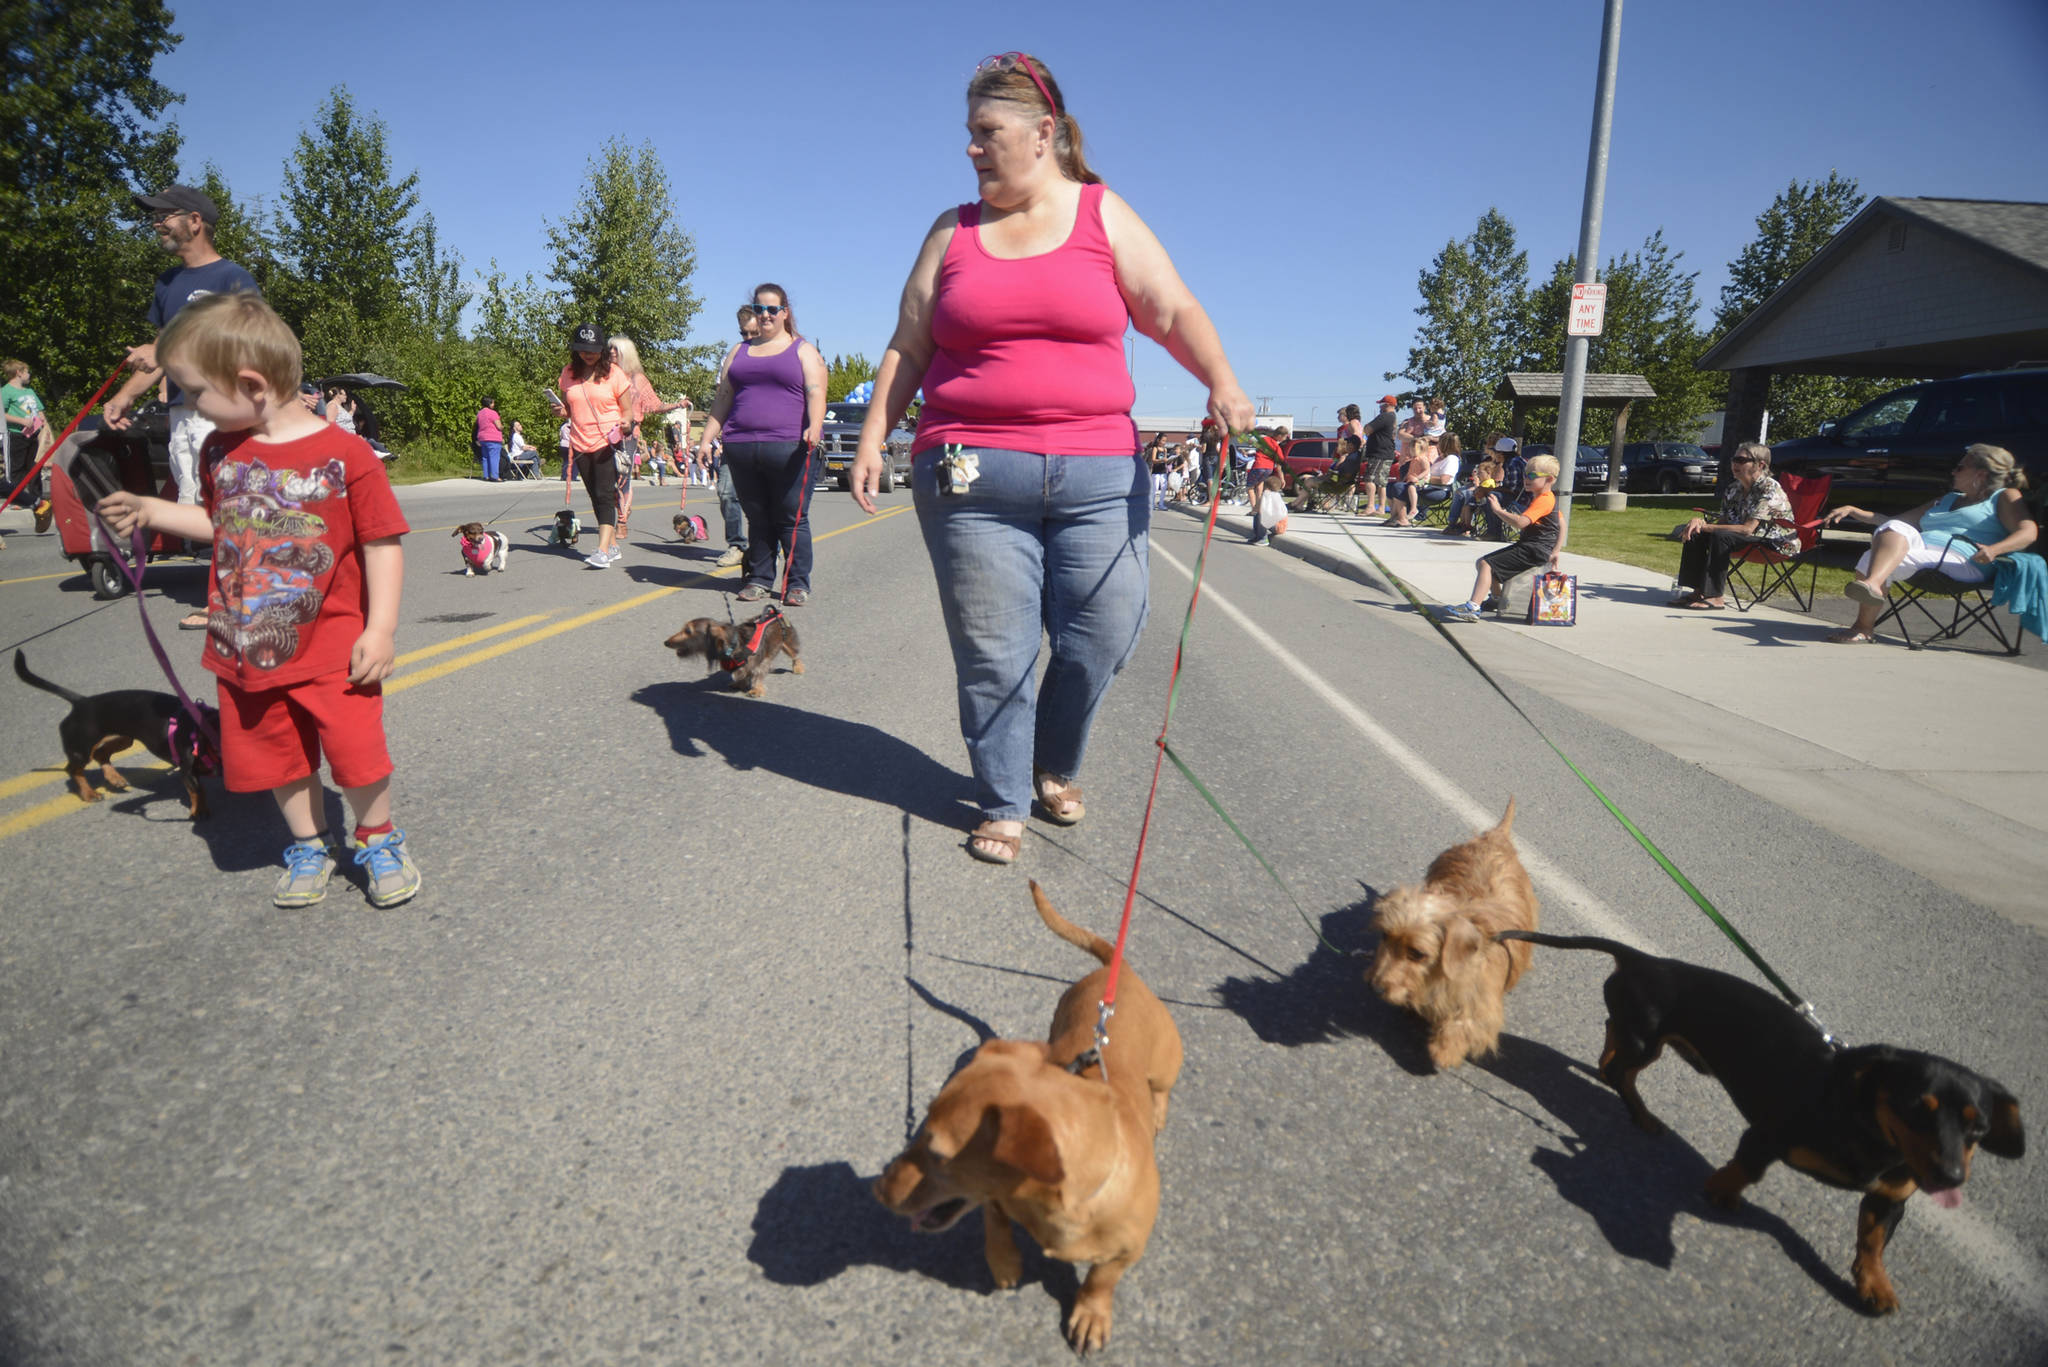 Daschund owners walk in the Soldotna Progress Days Parade, as they have for the past 24 years, as part of the group “Wieners on Parade,” on Saturday, July 22, 2017 in Soldotna, Alaska.